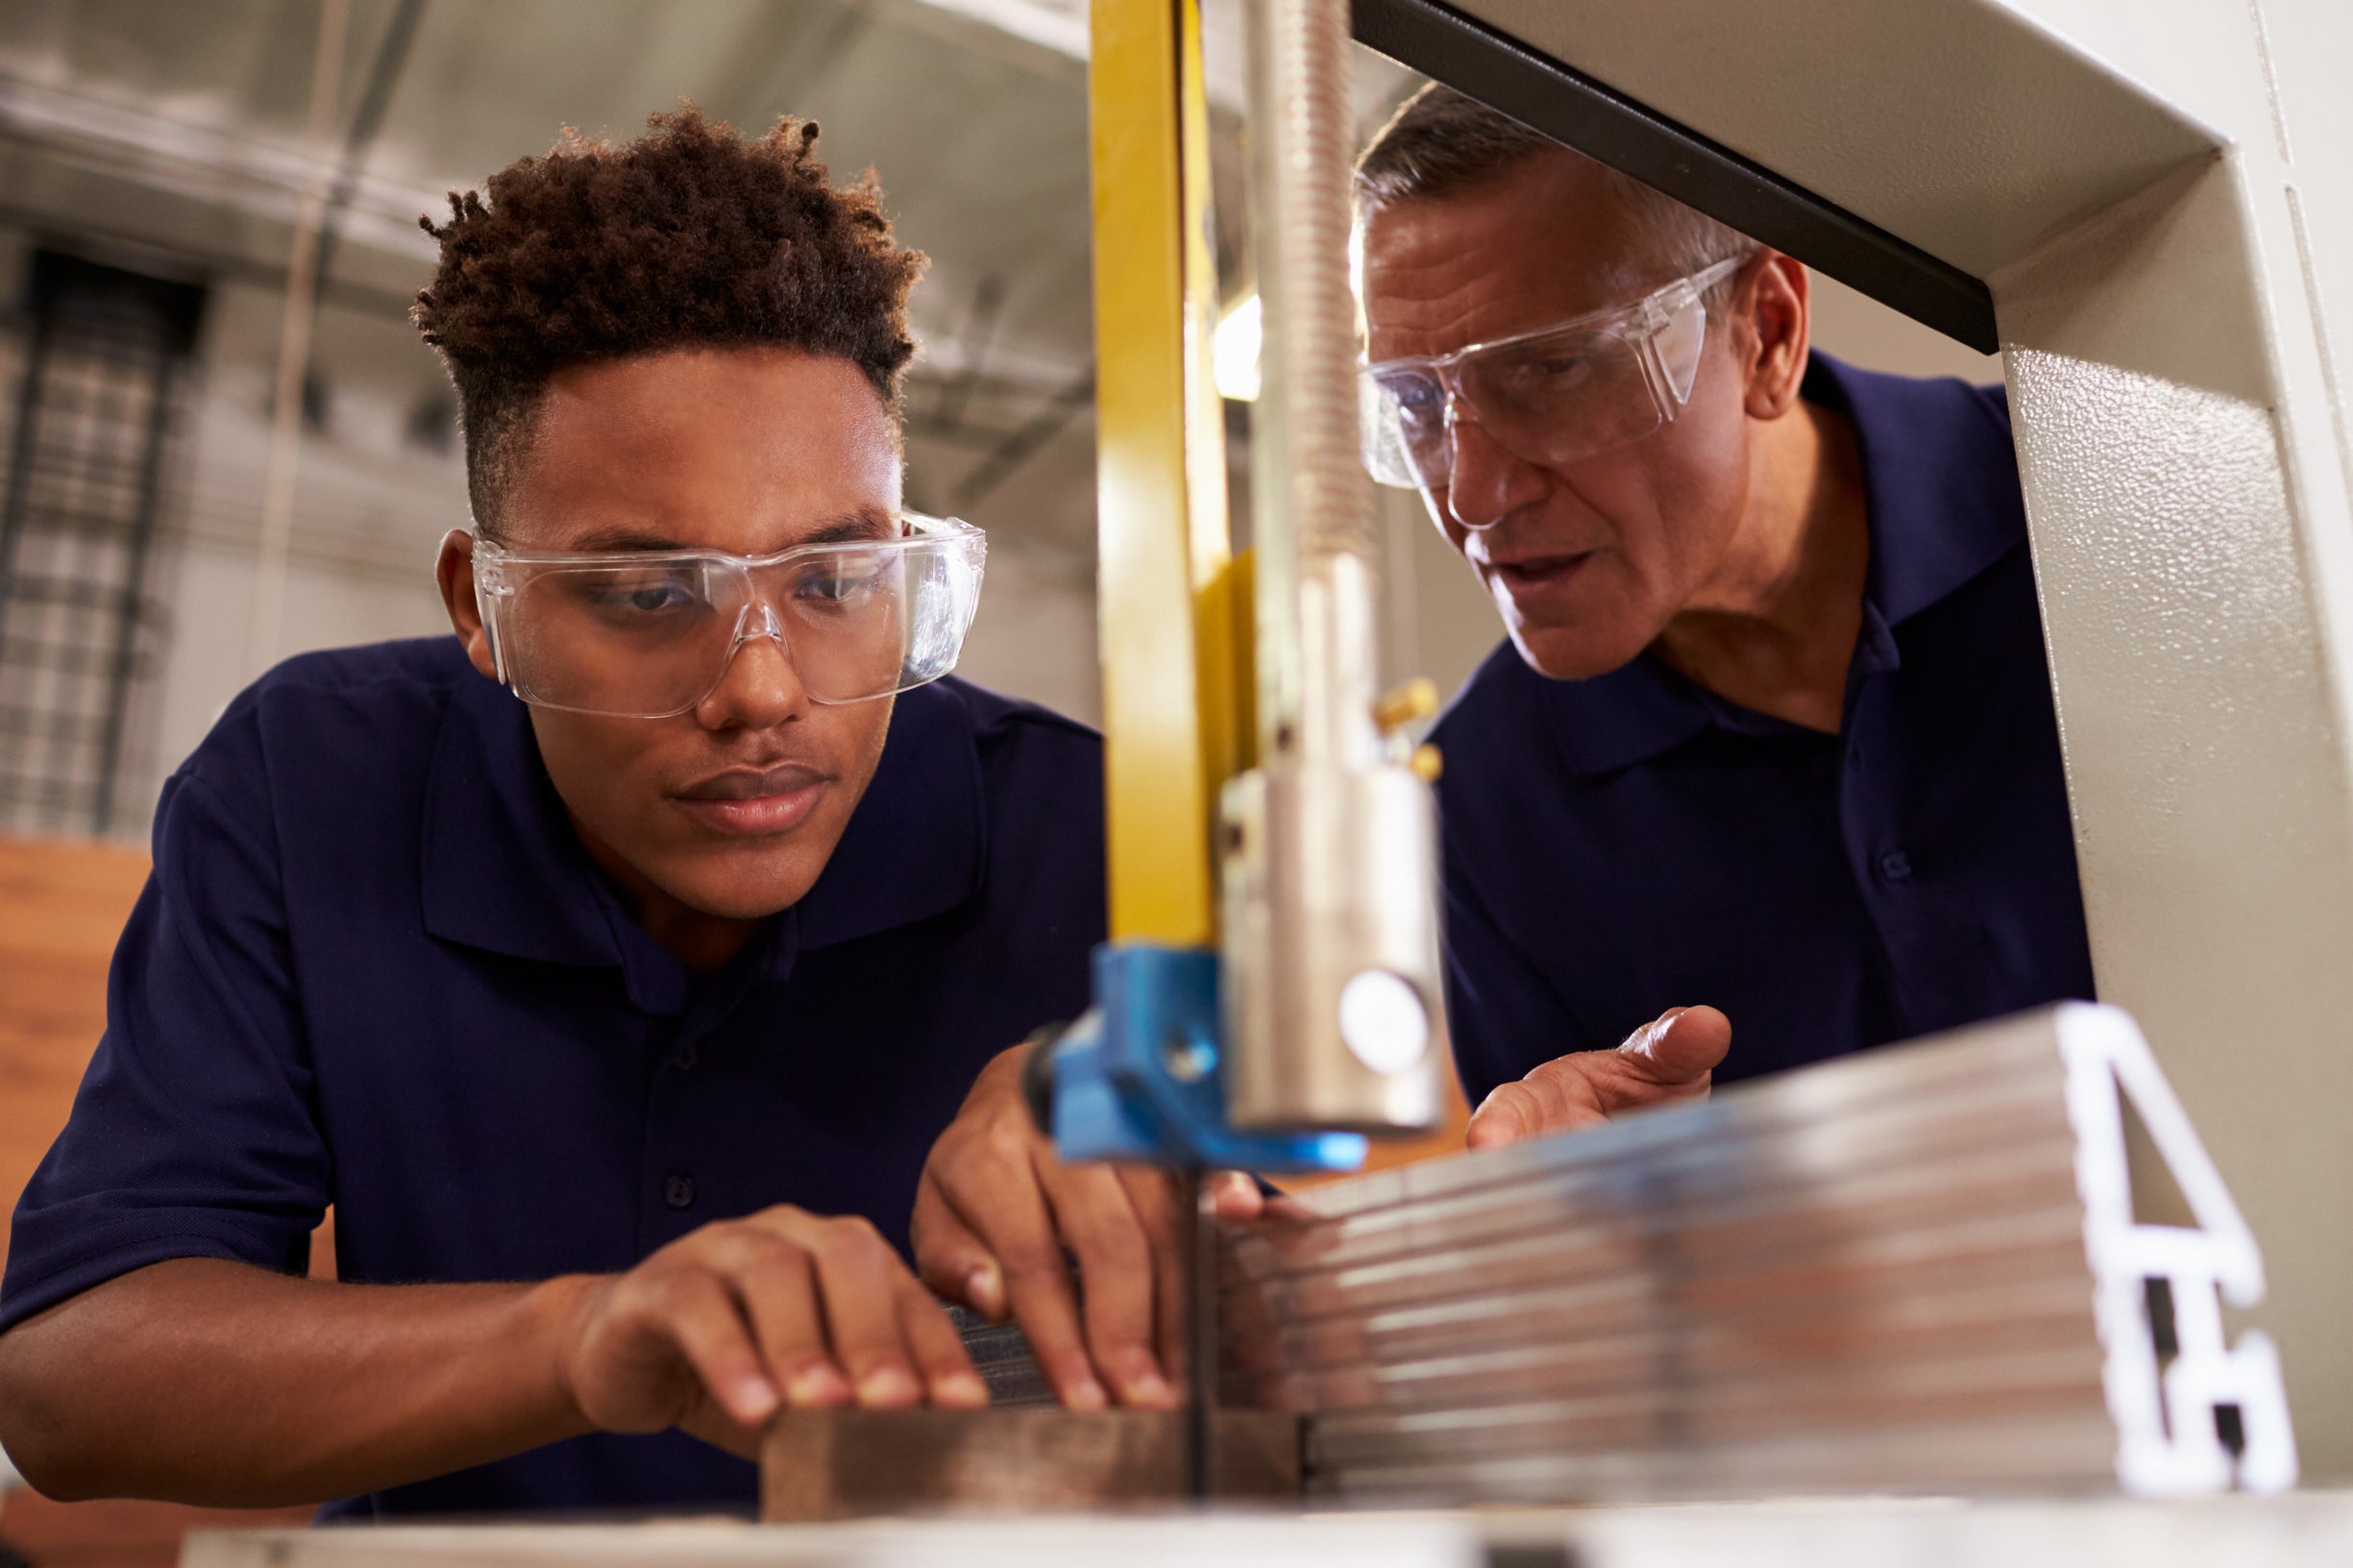 Kinder Institute research indicated that over two-thirds of area students take CTE programming.